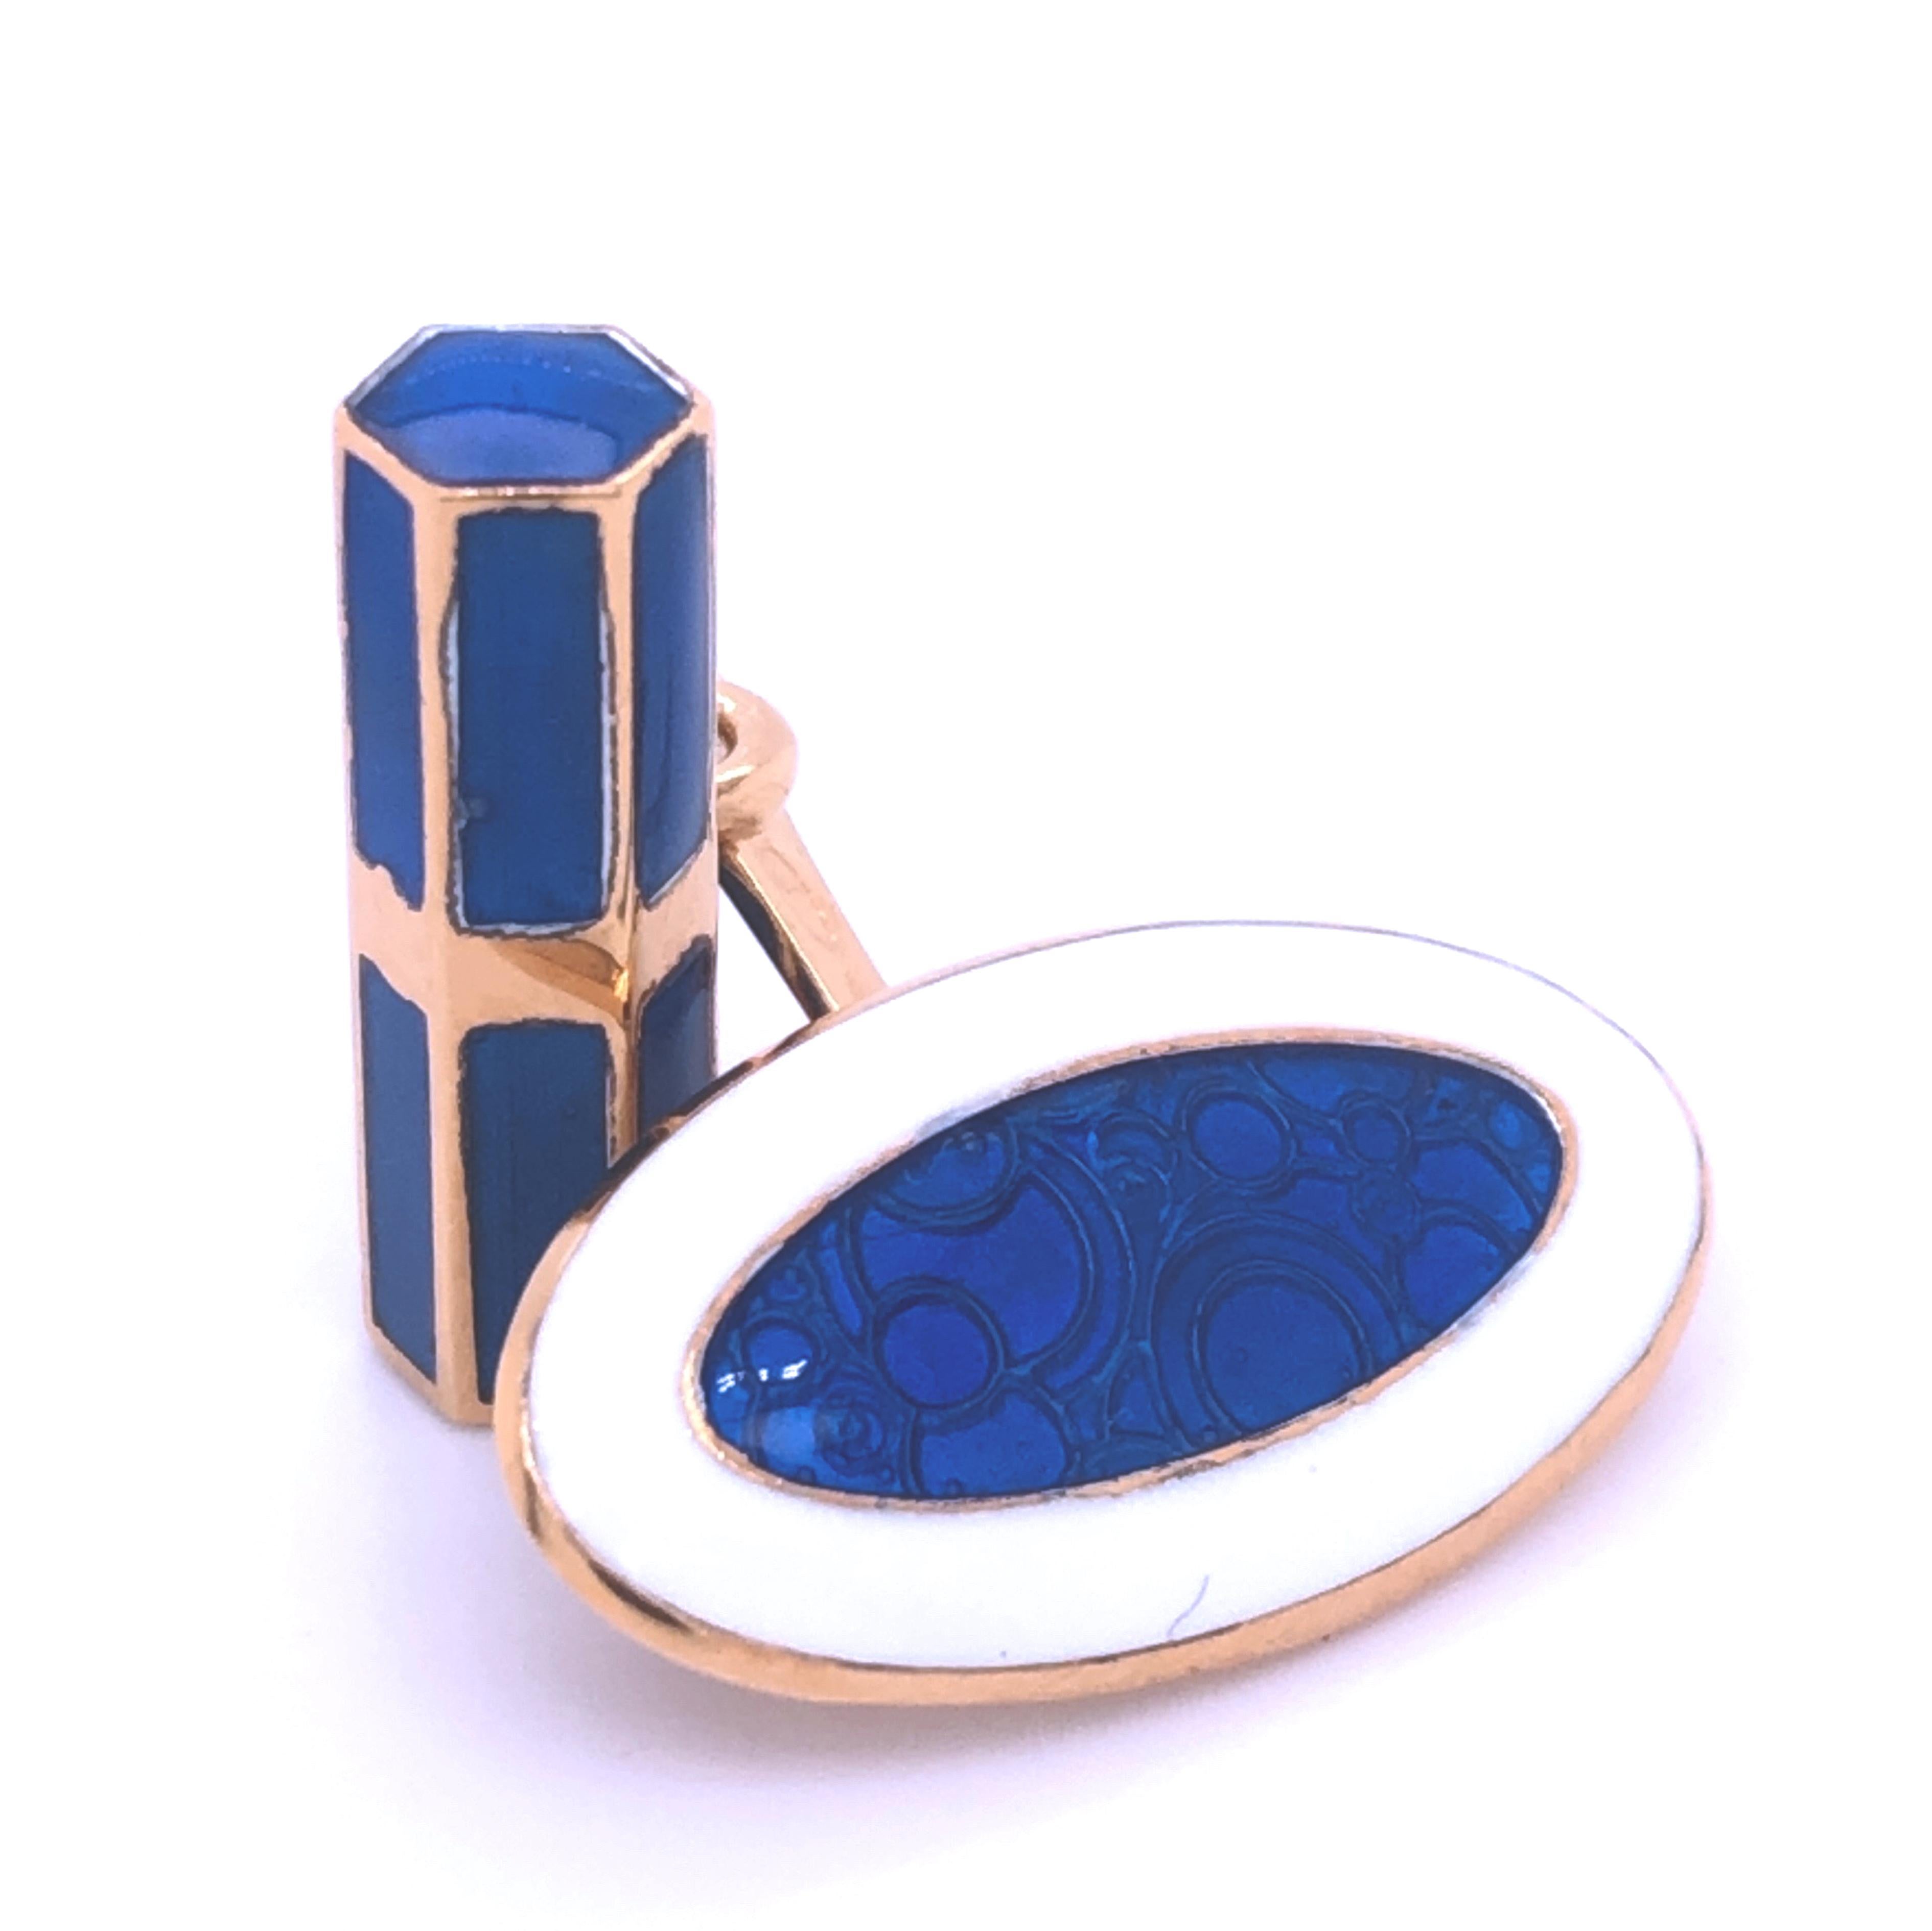 Chic Oval Royal Blue and White Gold-Plated Sterling Silver Cufflinks, French Champlevé Technique Hand Enameled.
Delivered to your door beautifully gift wrapped in our smart fitted Box and Pouch.

